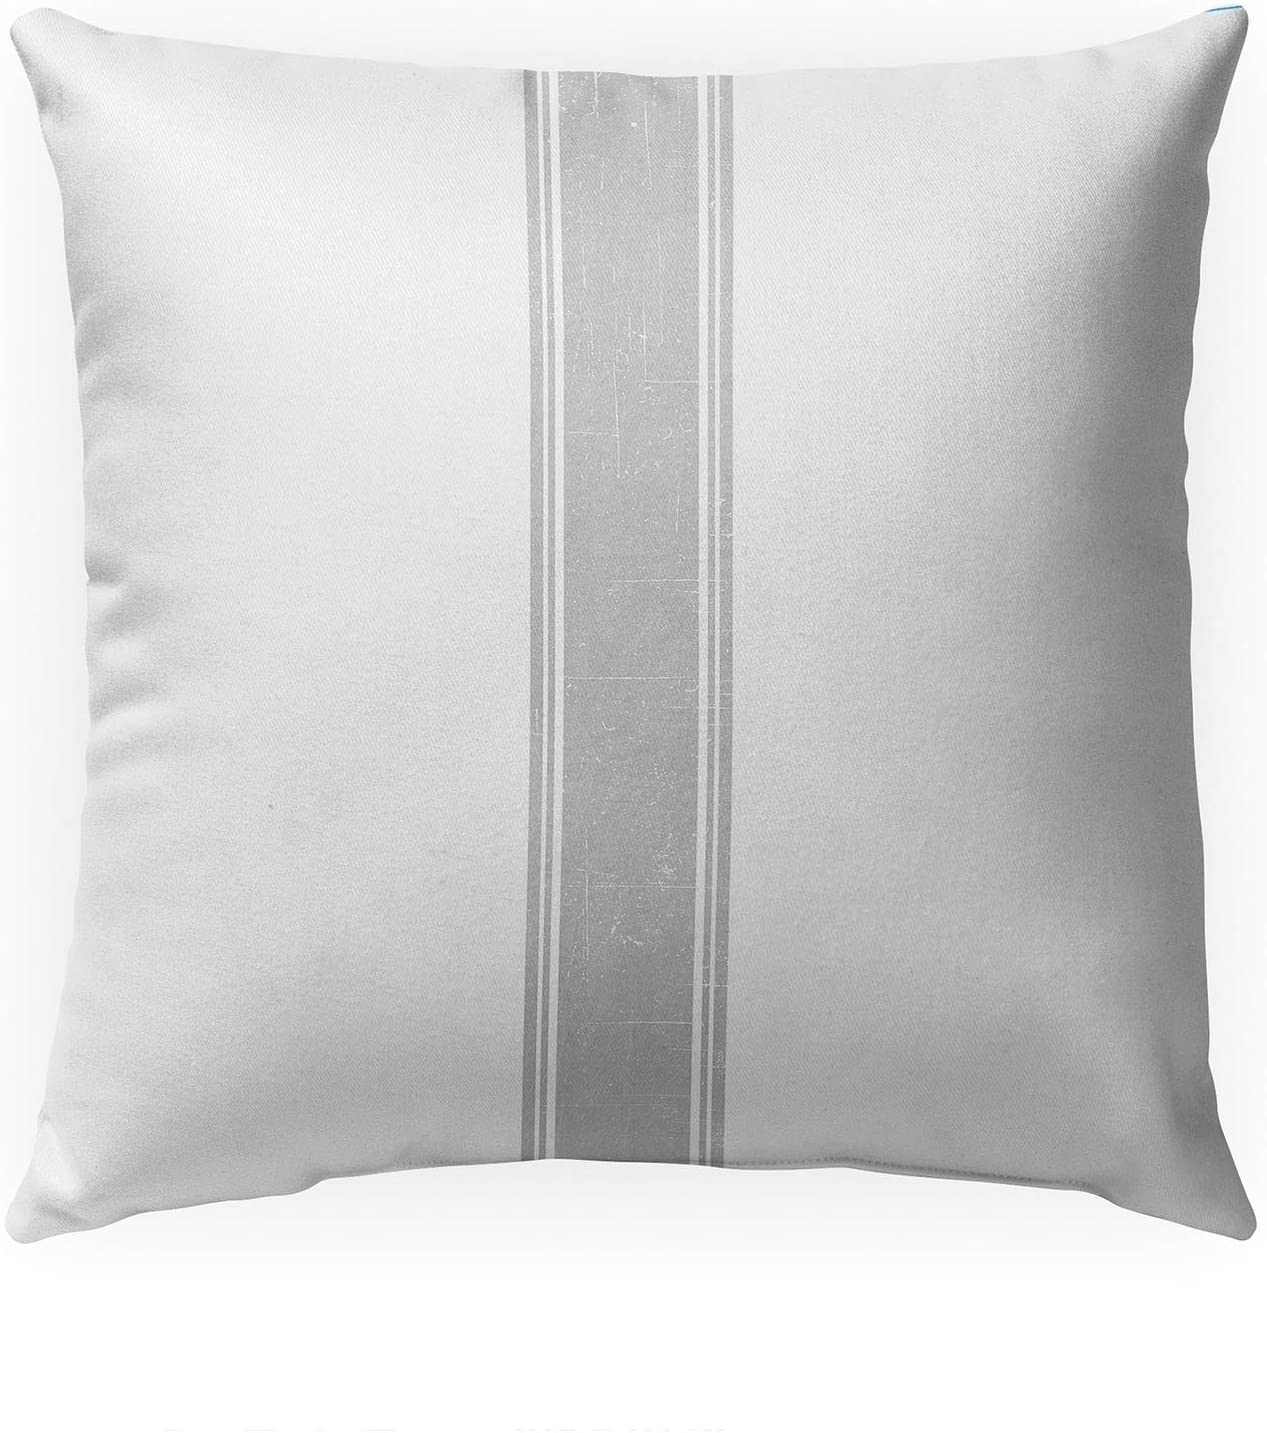 MISC Cattle Feed Two Indoor|Outdoor Pillow by 18x18